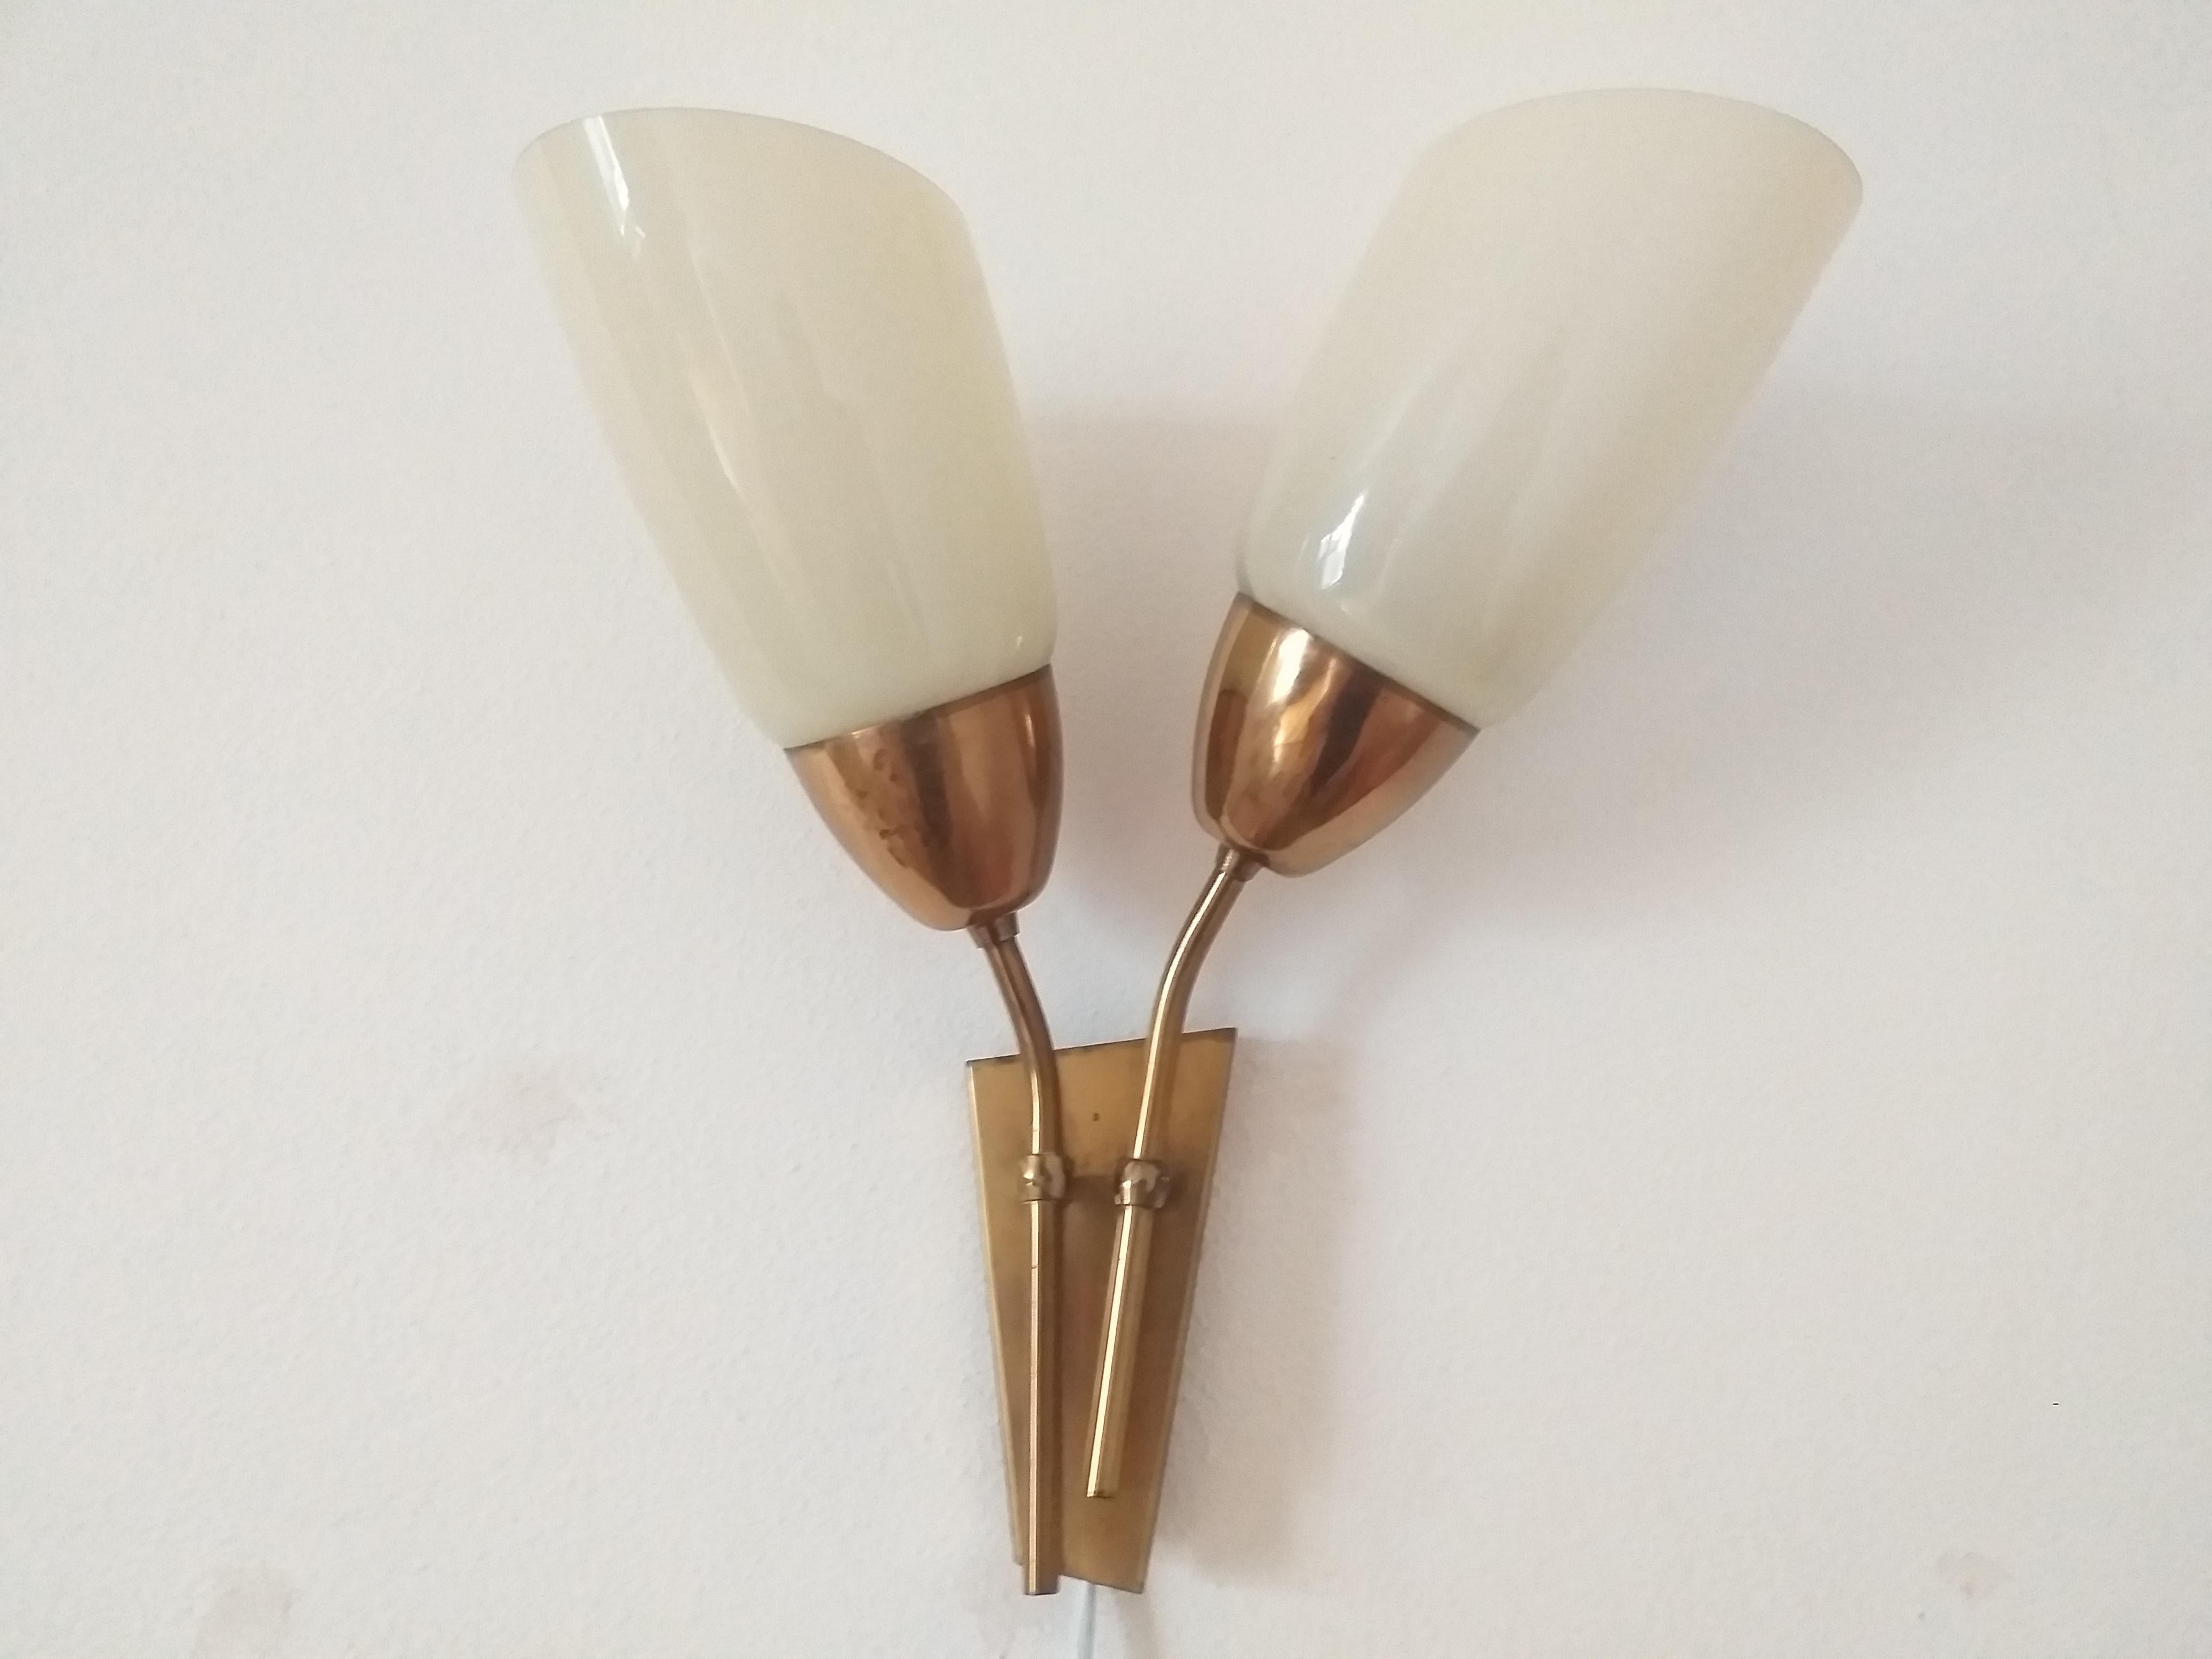 Pair of Midcentury Wall Lamps Kamenicky Senov, 1970s For Sale 1